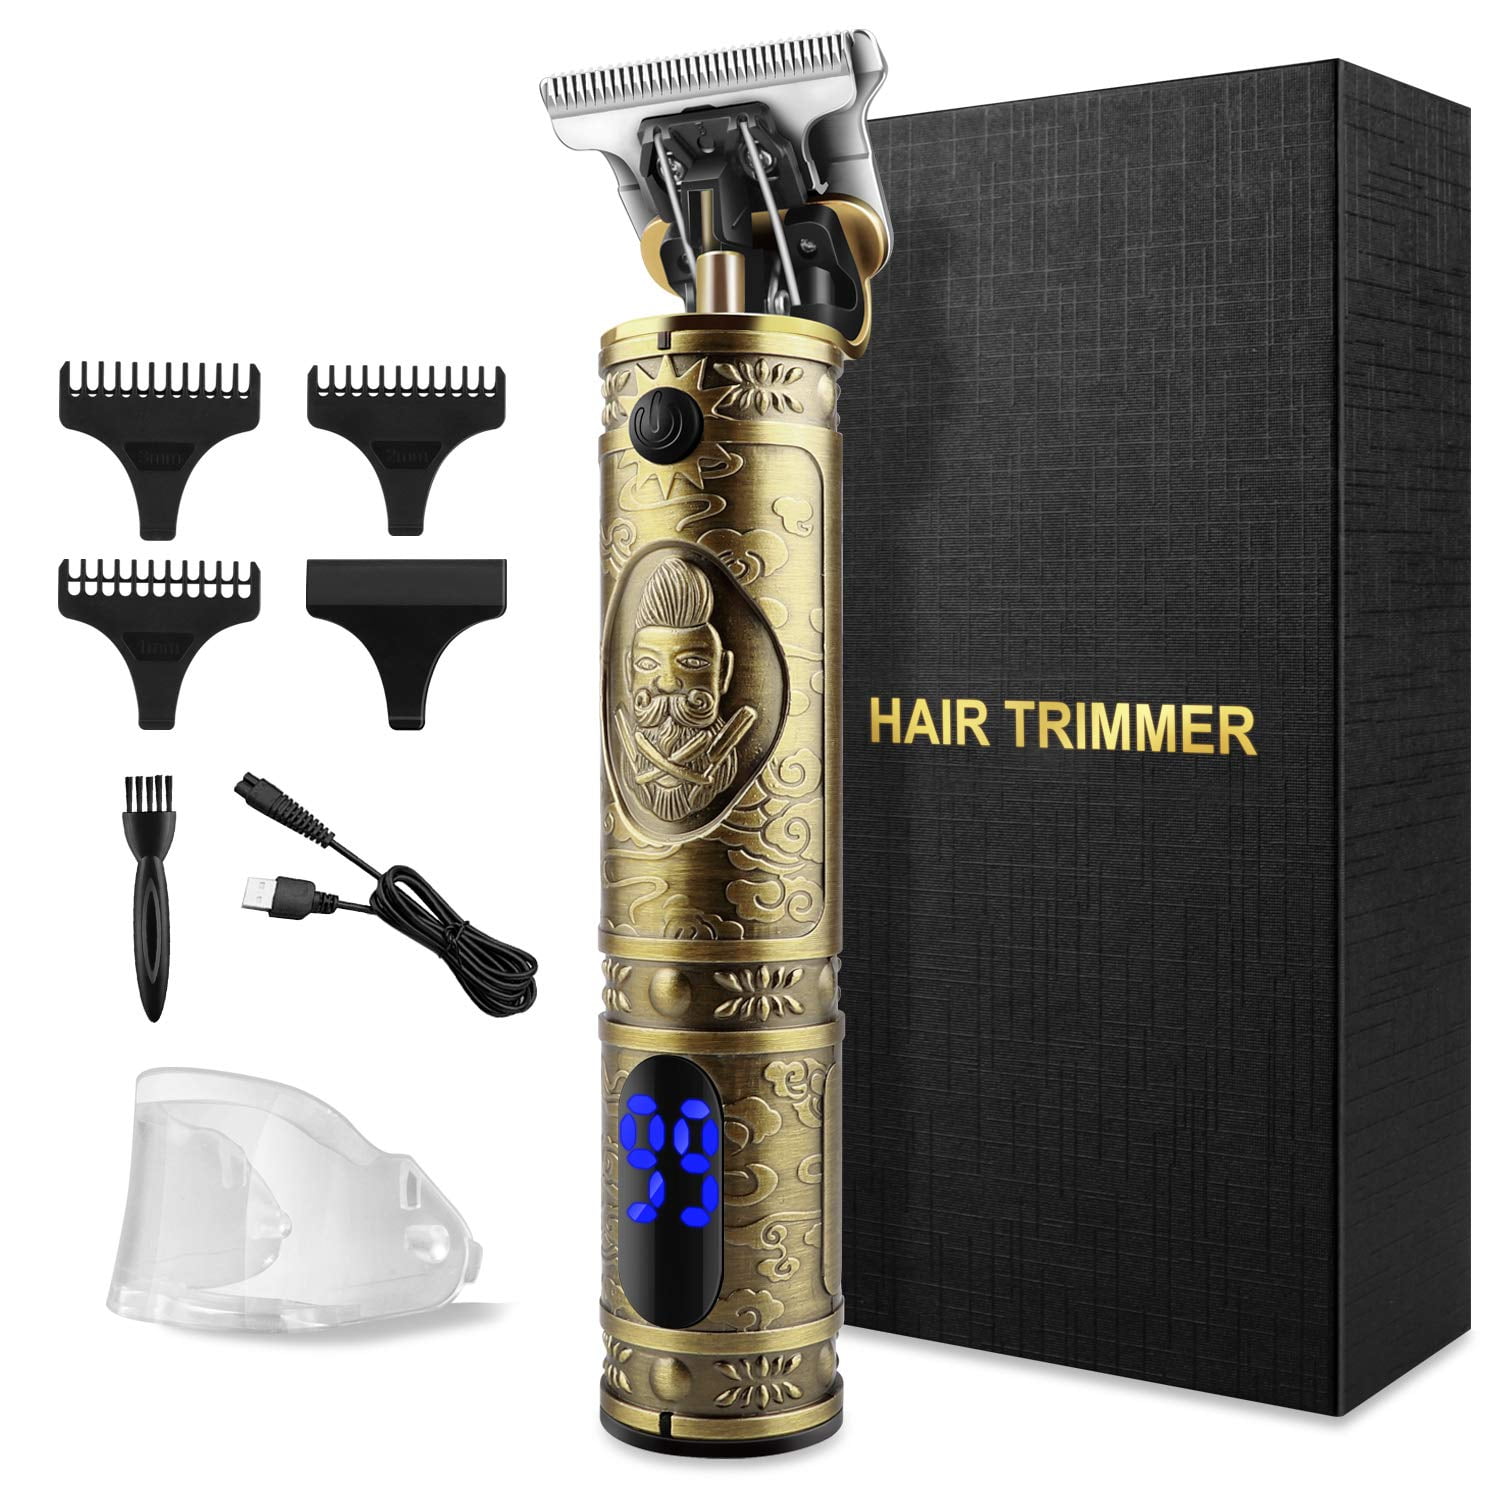 Hair Trimmer for Men, Hair Clippers, Professional Cordless Rechargeable  T-Blade Trimmers, 0mm Zero Gapped Baldhead Shaver Barbershop Home (Bronze)